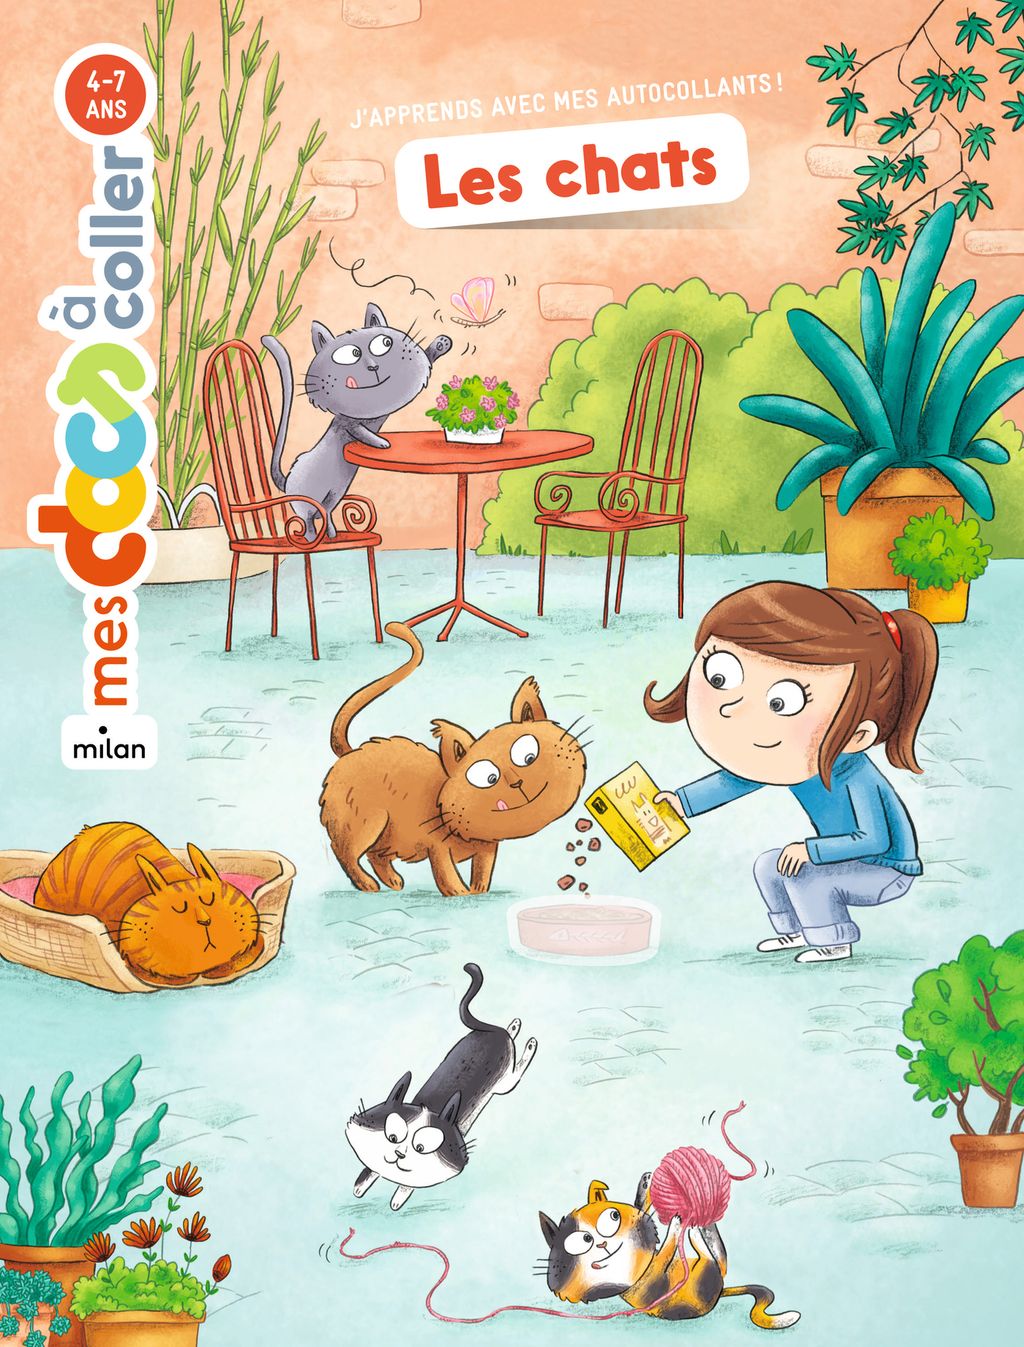 « Les chats » cover